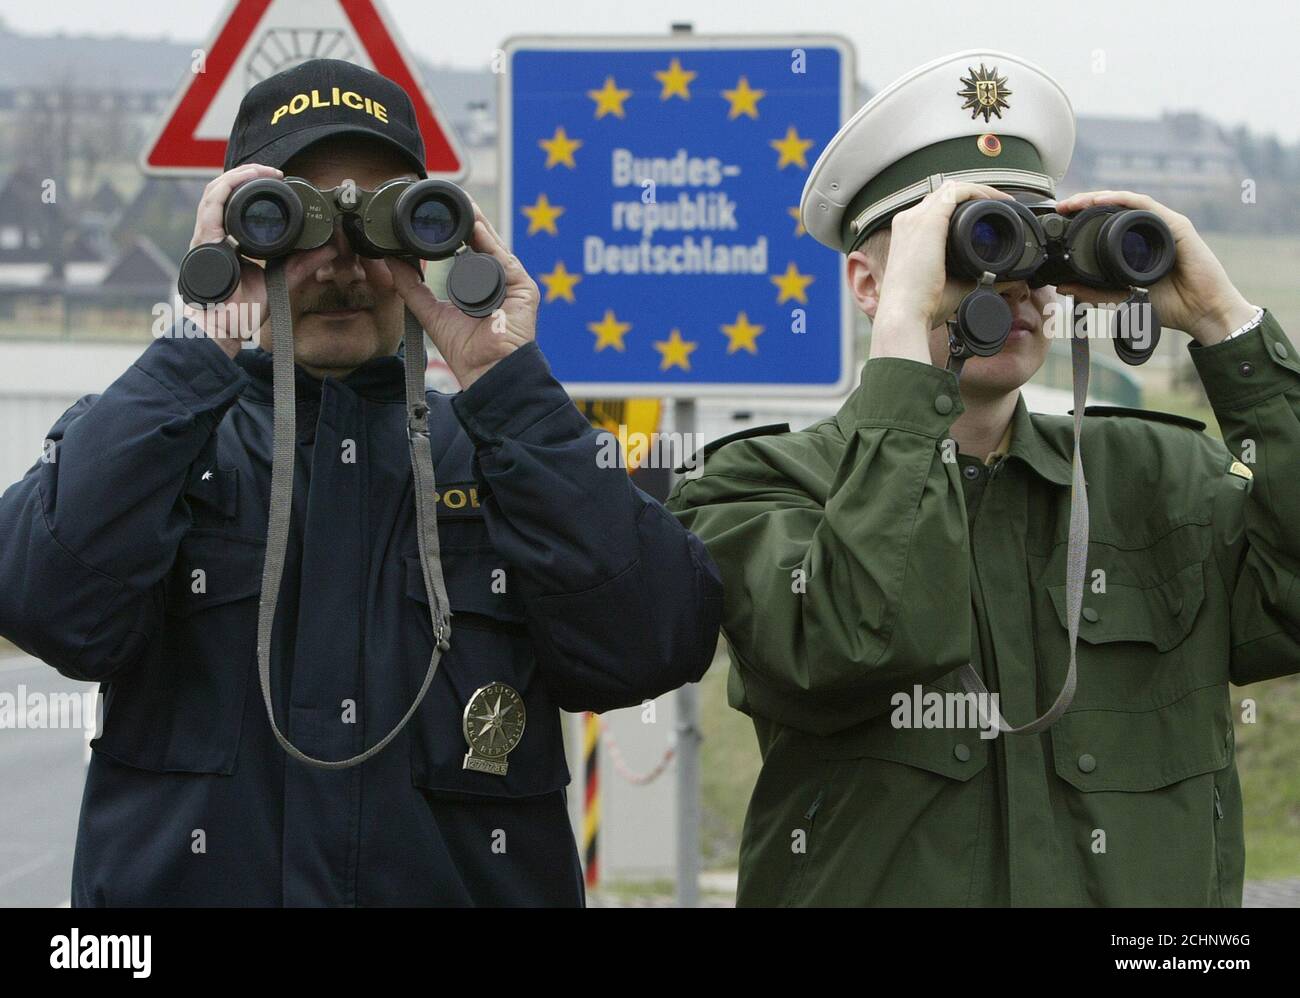 CZECH REPUBLIC AND GERMAN BORDER POLICE OFFICERS OBSERVE WITH THEIR  BINOCULARS THE GERMAN-CZECH UNGUARDED BORDER ZONE NEAR GERMAN VILLAGE OF  ZINNWALD. Petr Wolf (L) a Czech Republic border police officer and his